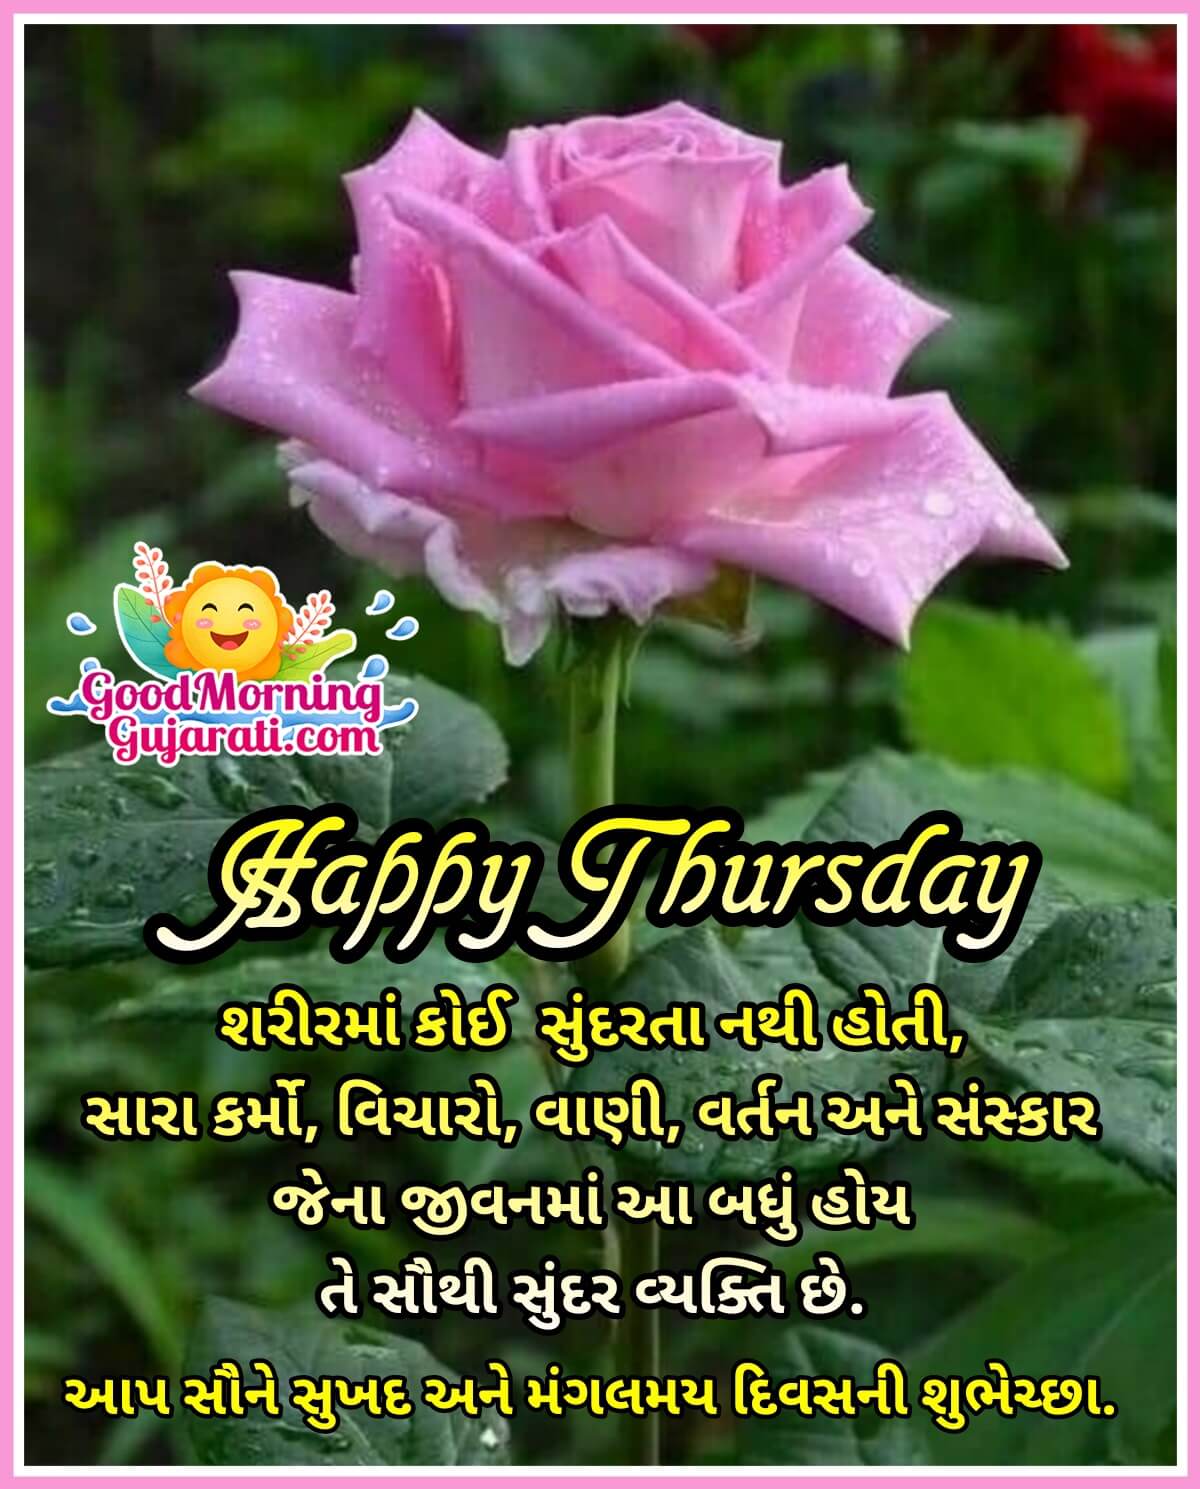 Happy Thursday Messages In Gujarati